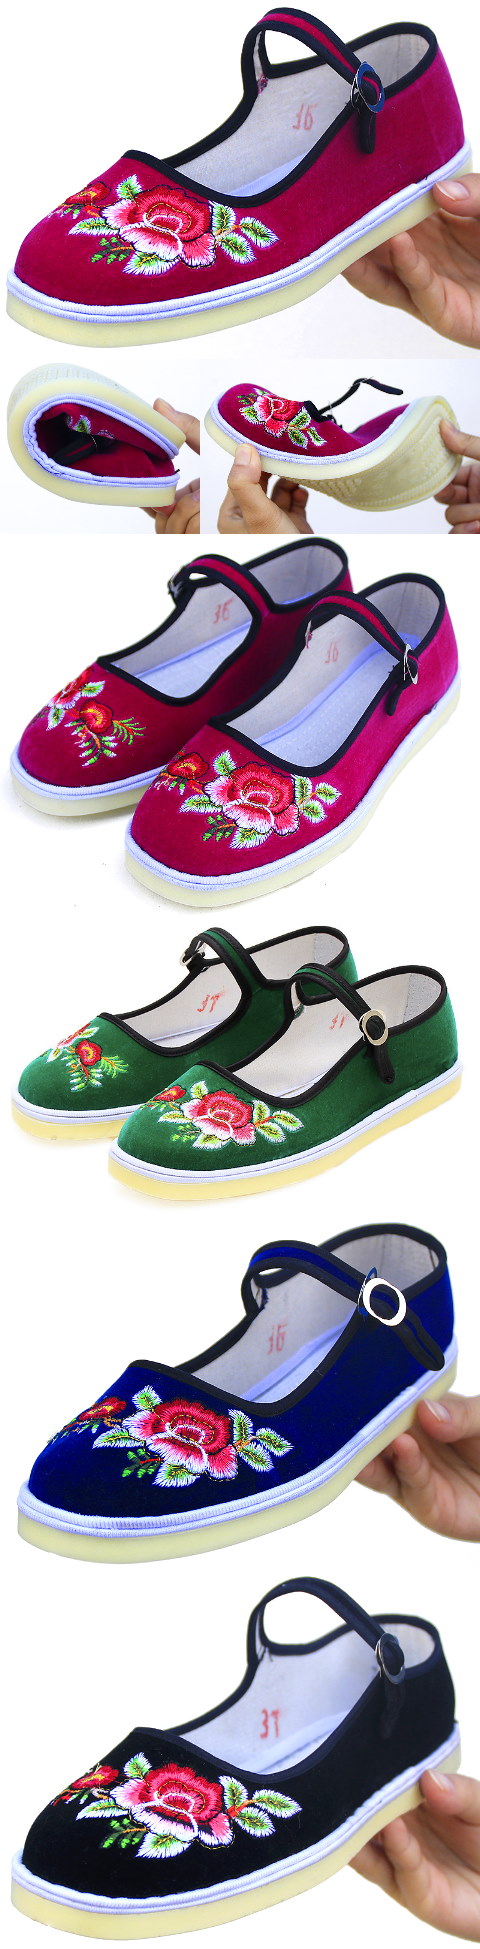 Handmade Embroidery Cloth Shoes w/ Strap